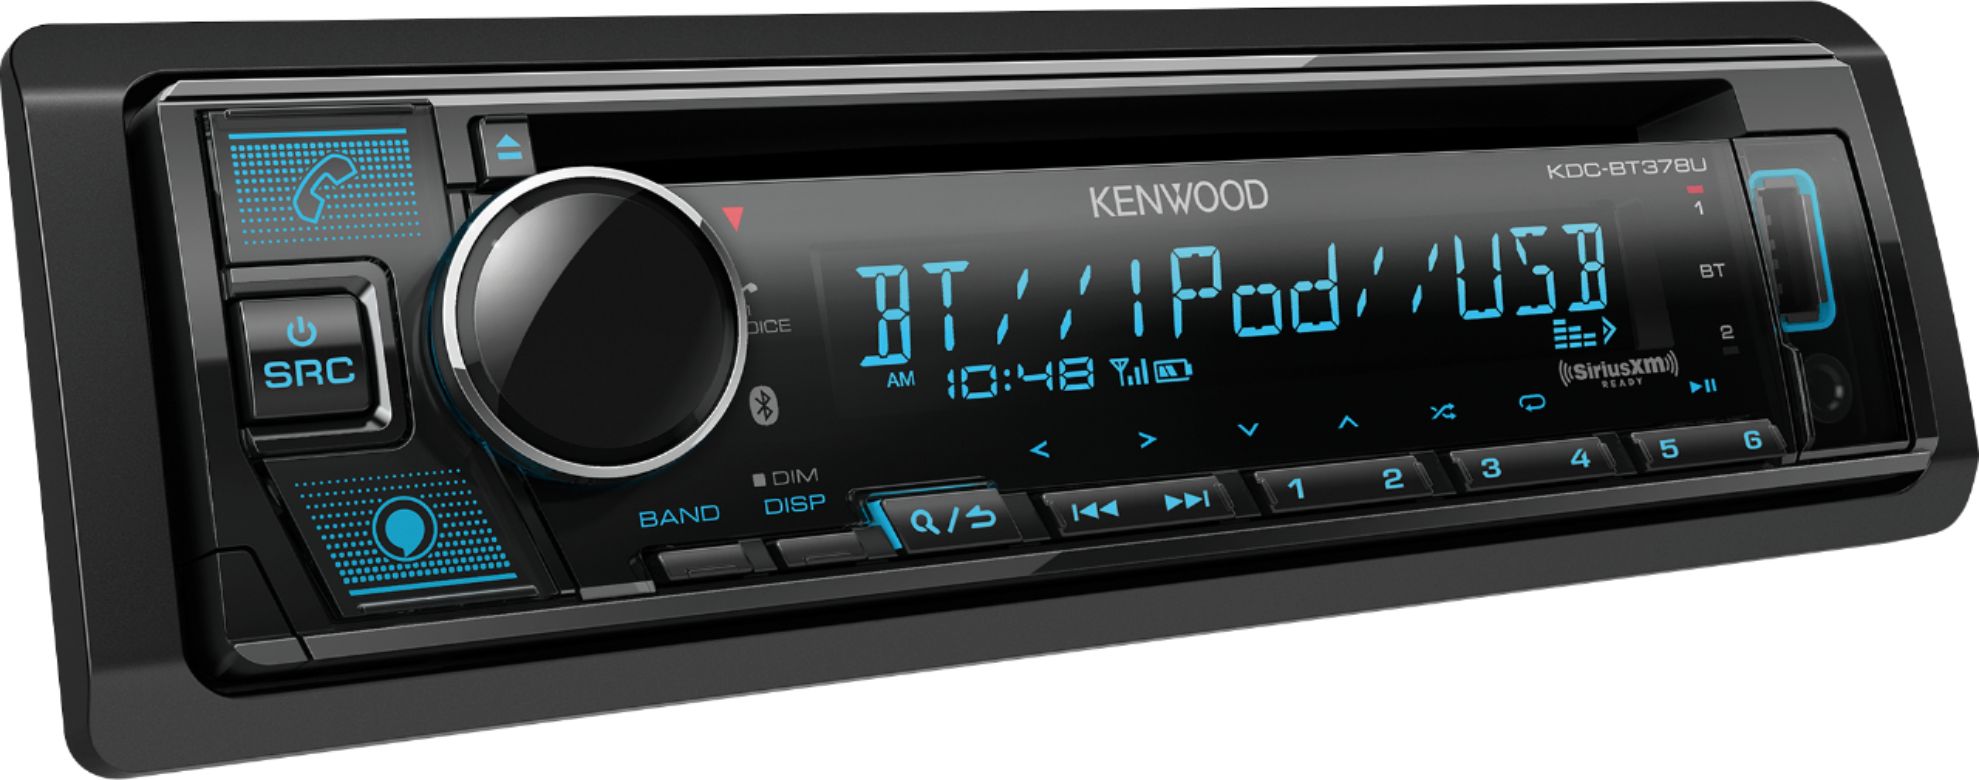 Angle View: Kenwood - In-Dash CD/DM Receiver - Built-in Bluetooth - Satellite Radio-Ready with Detachable Faceplate - Black